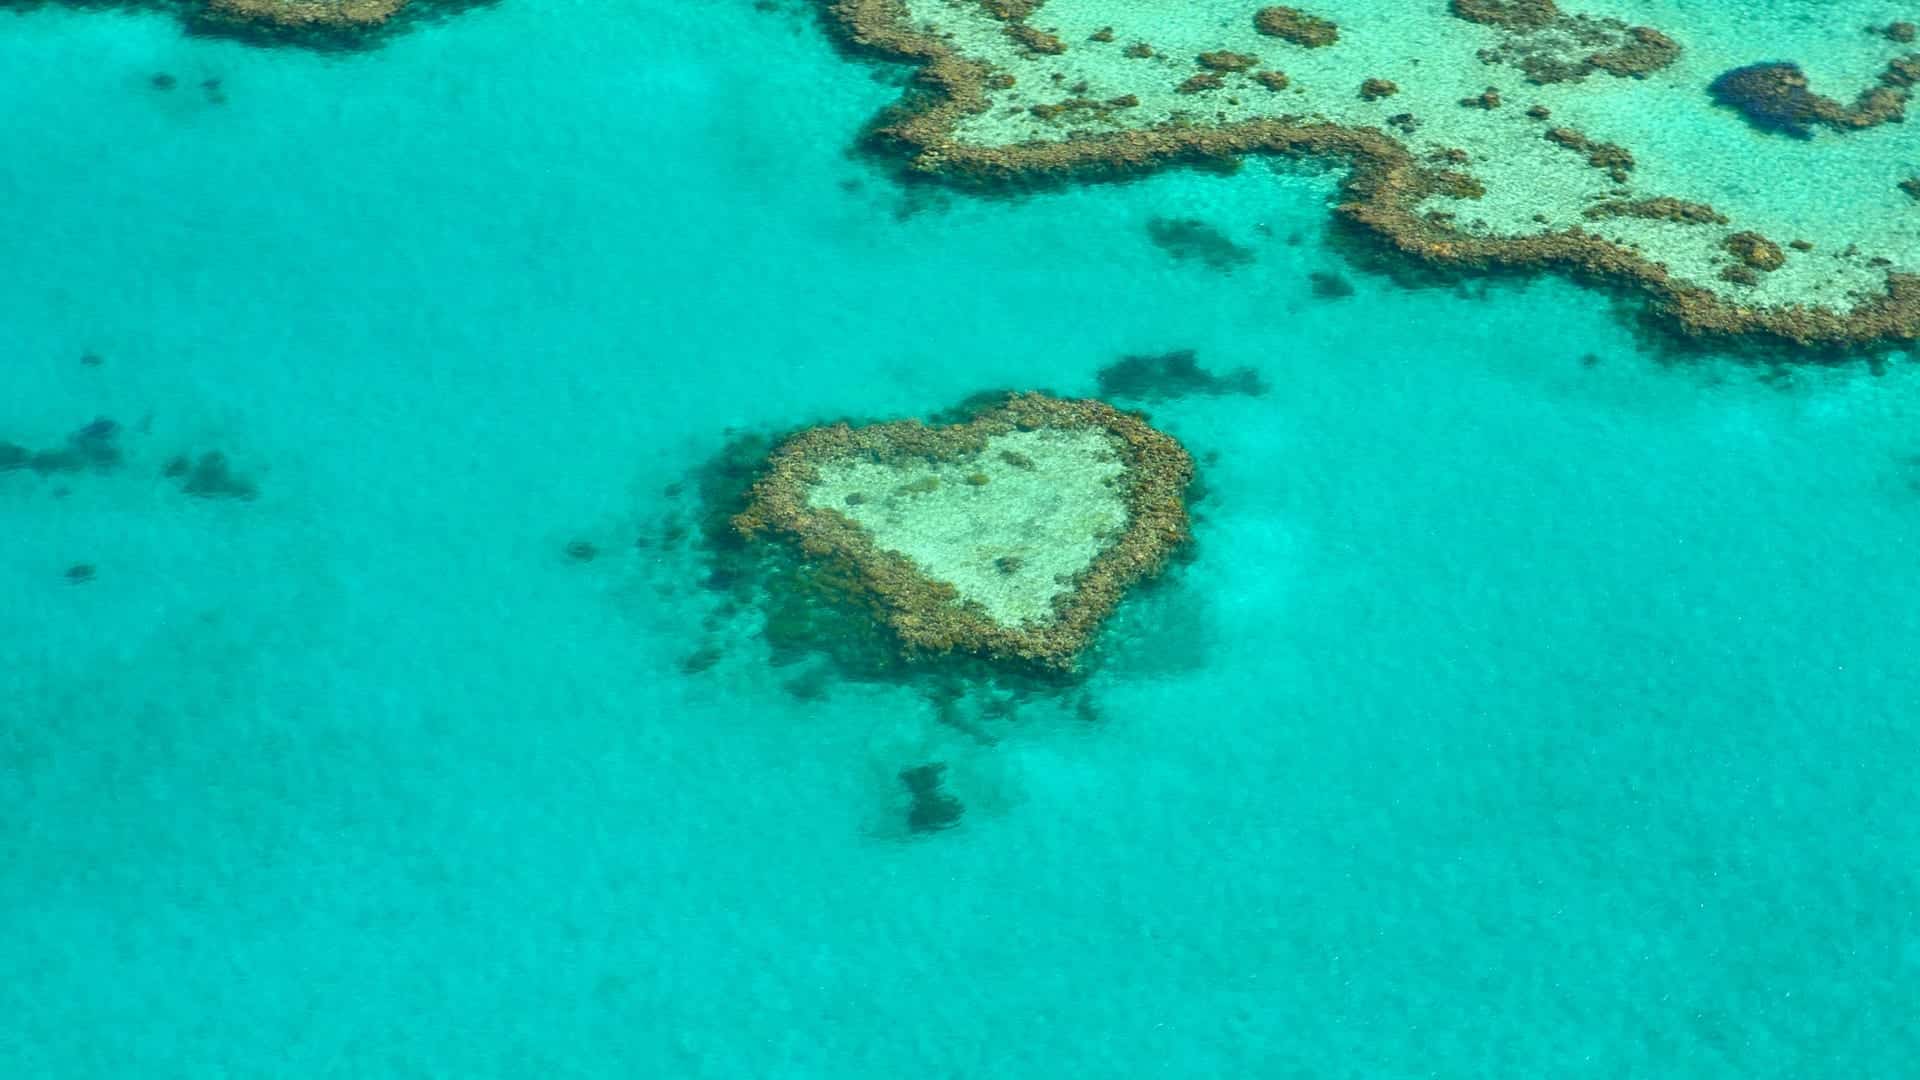 Visit Australia for: The Great Barrier Reef. An aerial image of heart reef.